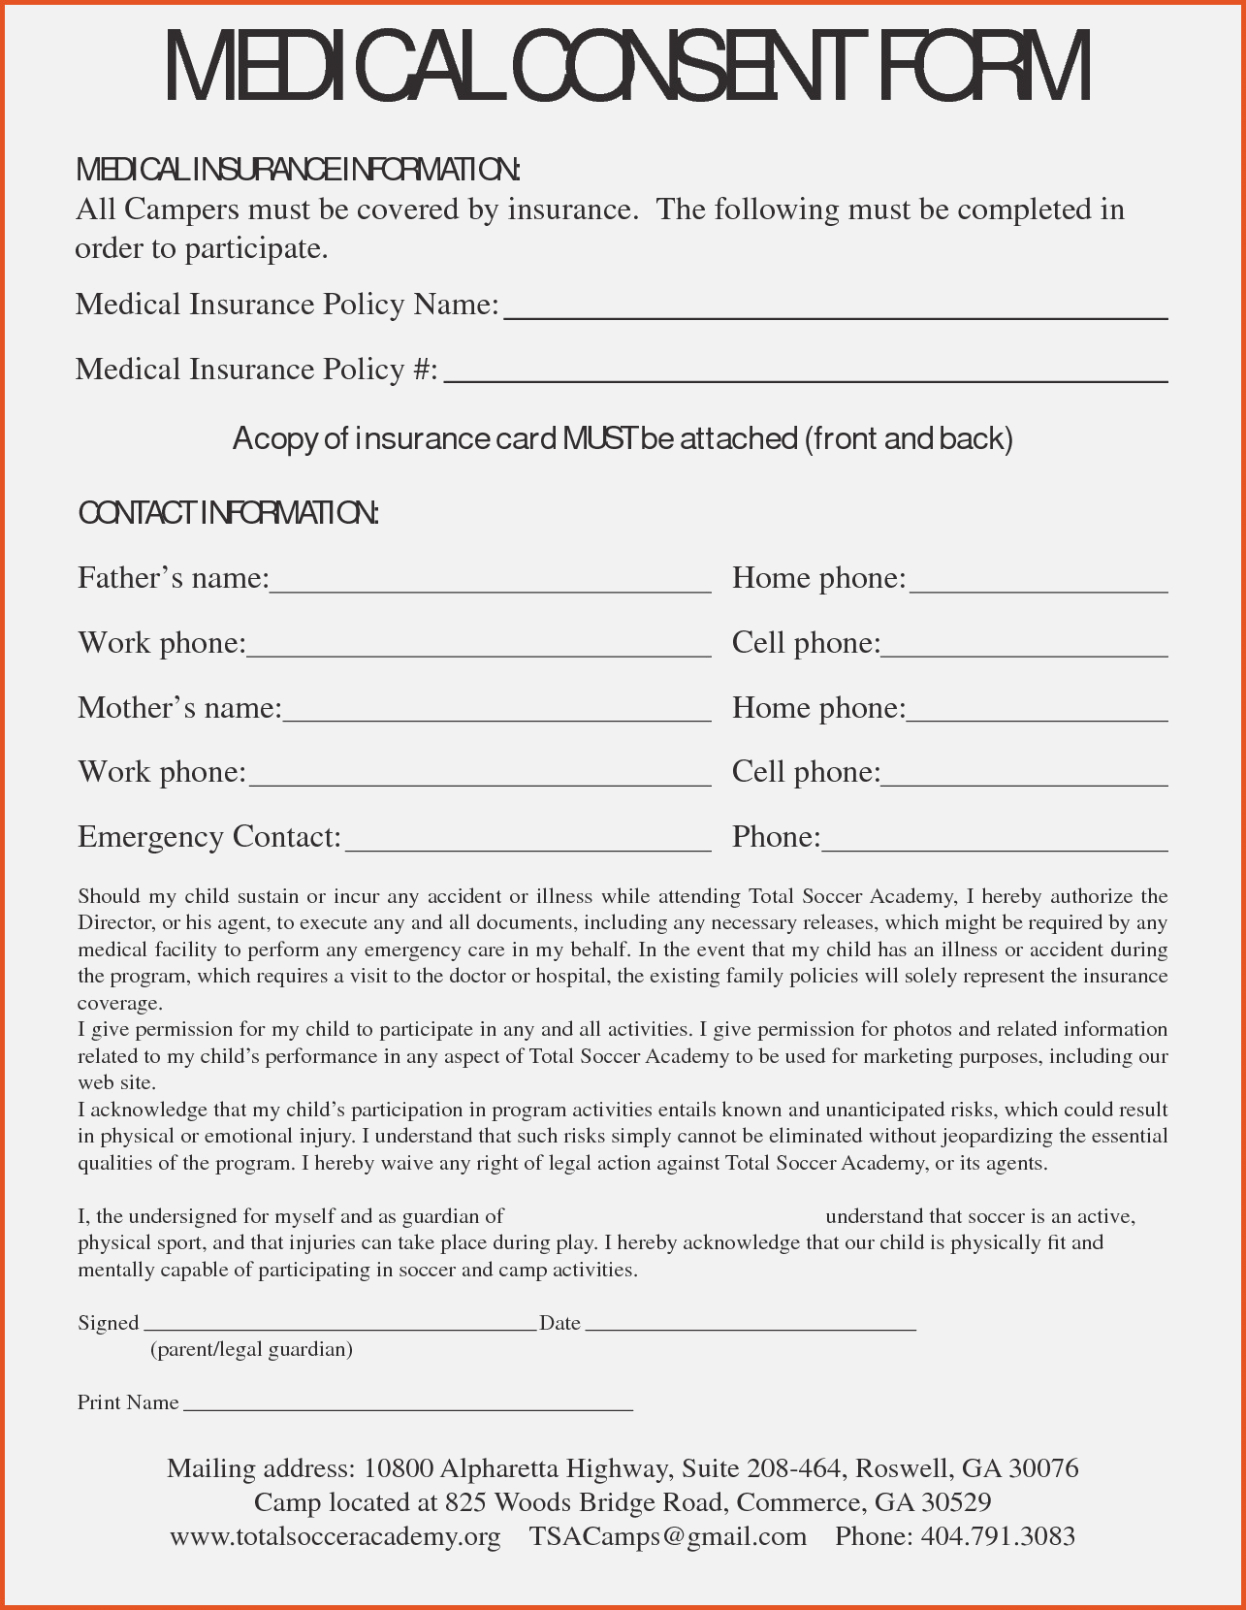 How To Write A Medical Consent Form For A Child